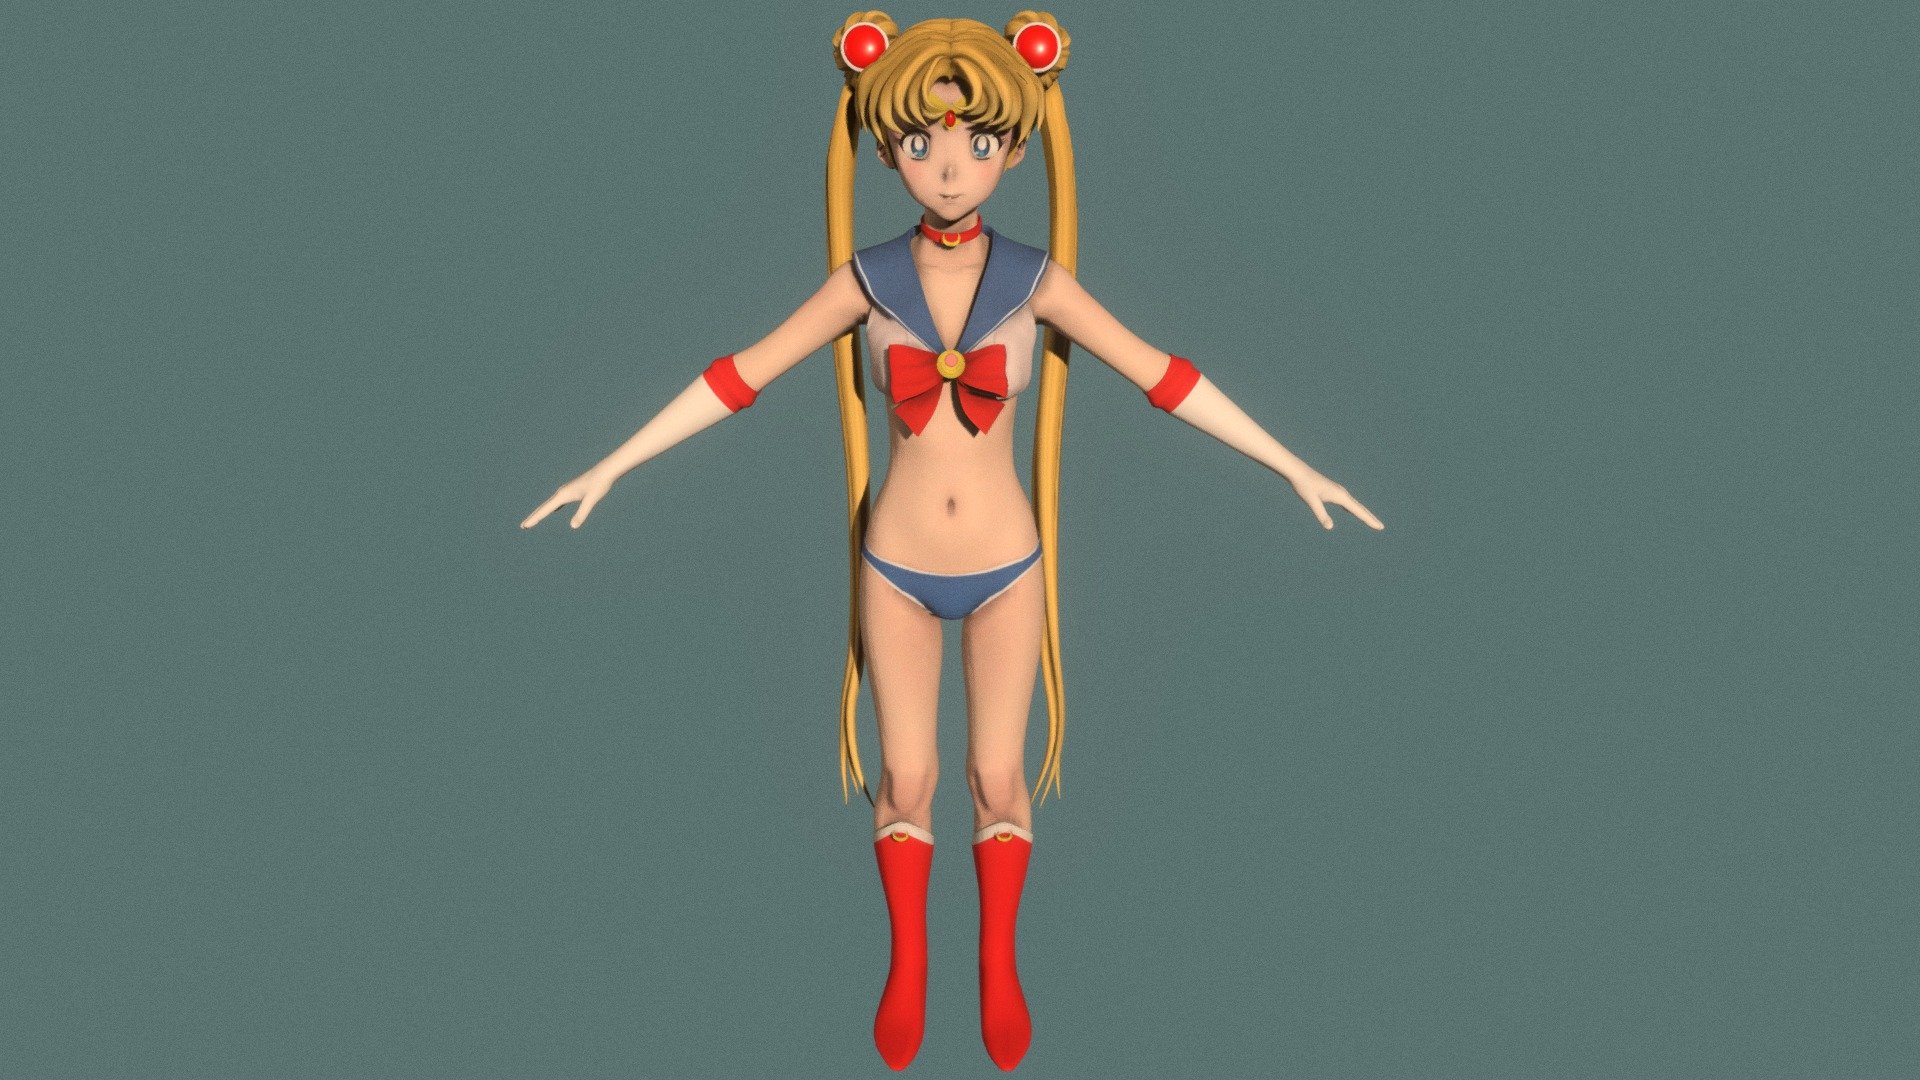 T-pose rigged model of anime girl Sailor Moon (Sailor Moon).

Body and clothings are rigged and skinned by 3ds Max CAT system.

Eye direction and facial animation controlled by Morpher modifier / Shape Keys / Blendshape.

This product include .FBX (ver. 7200) and .MAX (ver. 2010) files.

3ds Max version is turbosmoothed to give a high quality render (as you can see here).

Original main body mesh have ~7.000 polys.

This 3D model may need some tweaking to adapt the rig system to games engine and other platforms.

I support convert model to various file formats (the rig data will be lost in this process): 3DS; AI; ASE; DAE; DWF; DWG; DXF; FLT; HTR; IGS; M3G; MQO; OBJ; SAT; STL; W3D; WRL; X.

You can buy all of my models in one pack to save cost: https://sketchfab.com/3d-models/all-of-my-anime-girls-c5a56156994e4193b9e8fa21a3b8360b

And I can make commission models.

If you have any questions, please leave a comment or contact me via my email 3d.eden.project@gmail.com 3d model